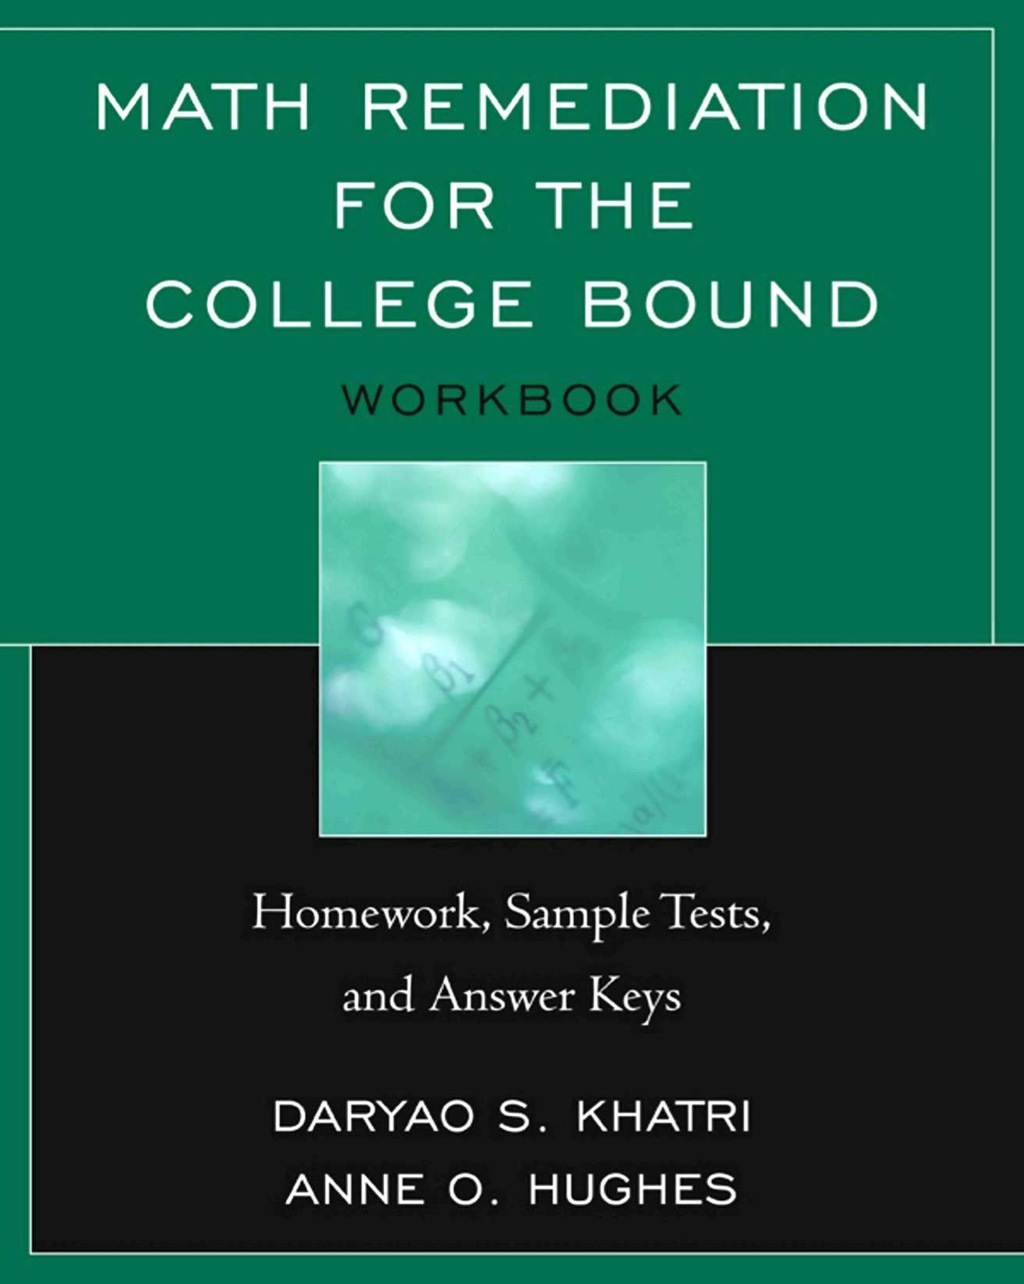 Math Remediation for the College Bound (eBook Rental)